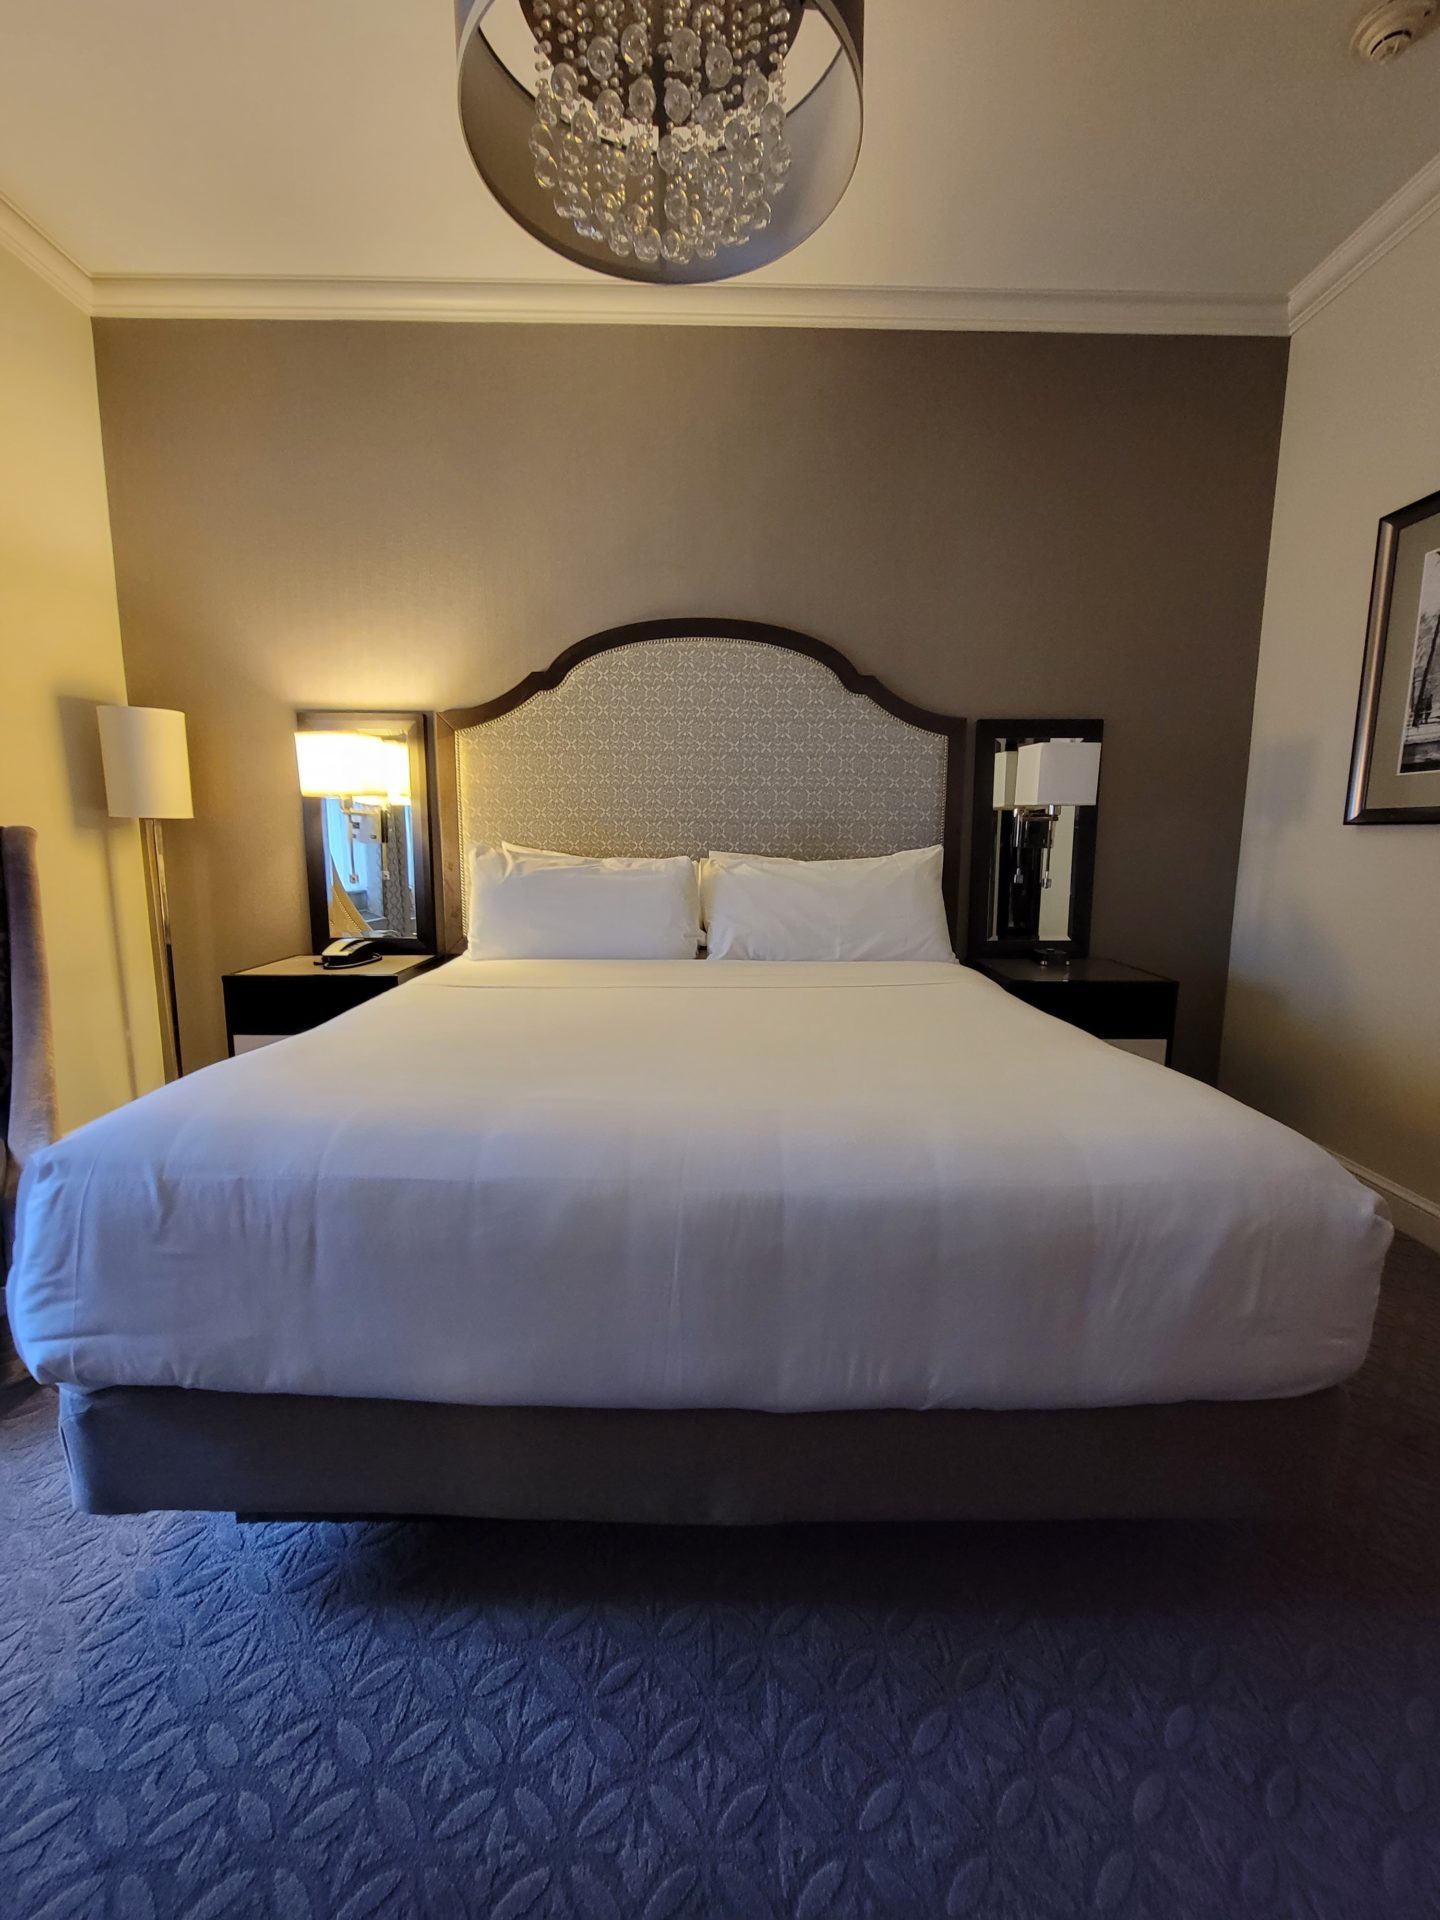 a bed with white sheets and a lamp